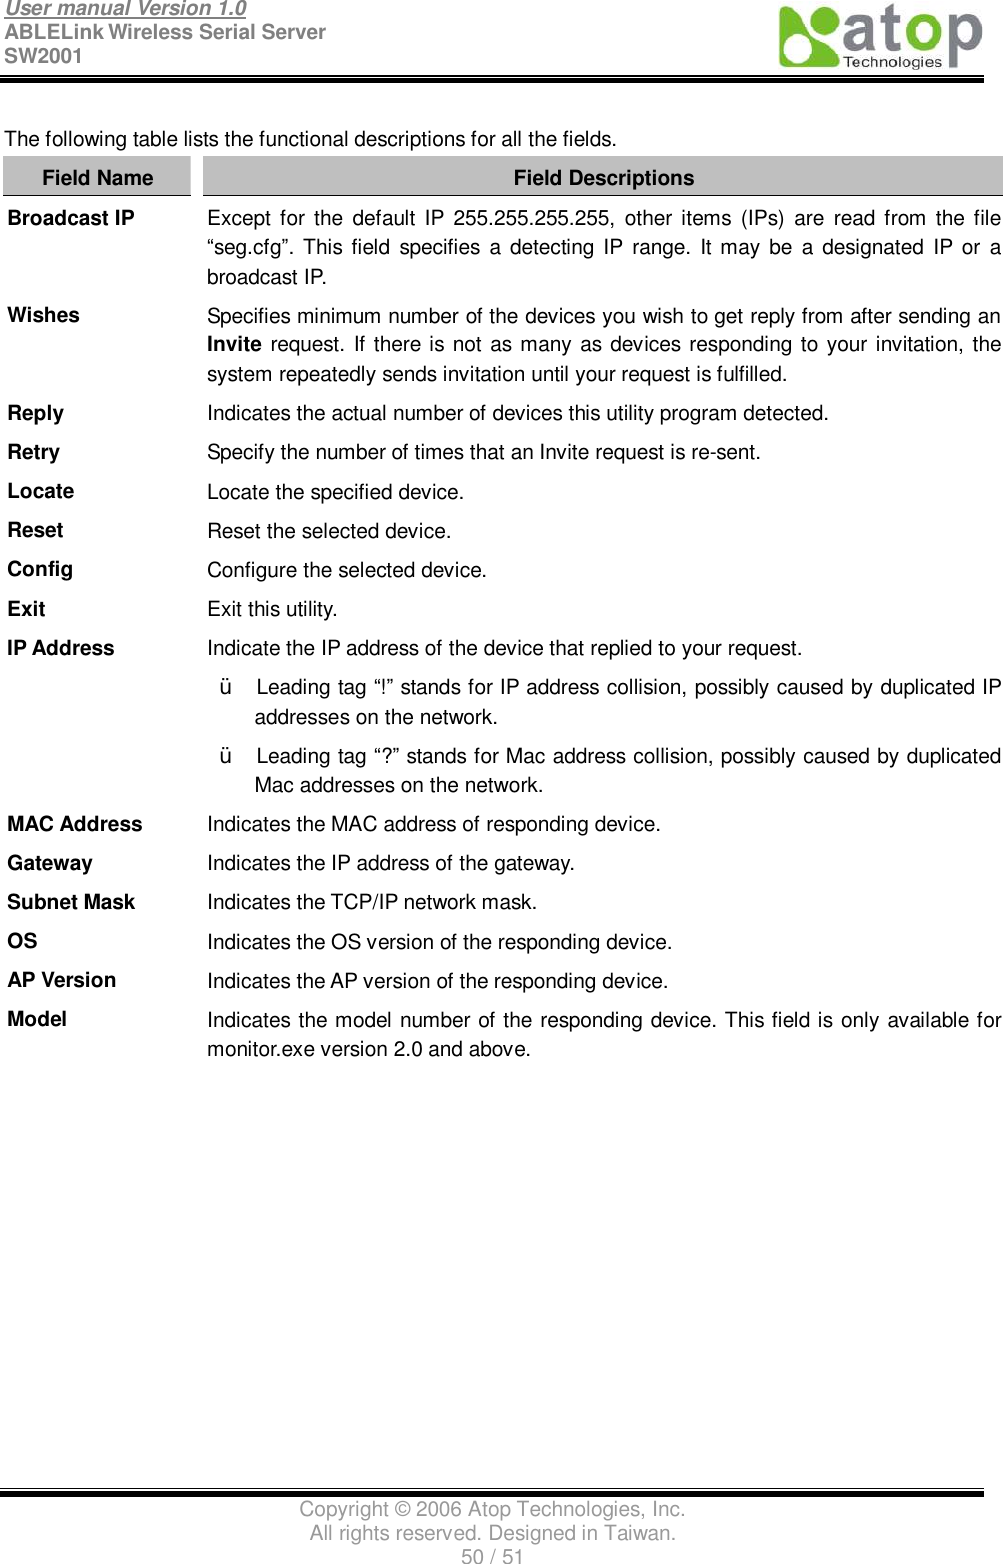 User manual Version 1.0 ABLELink Wireless Serial Server  SW2001                                                                                                                               Copyright © 2006 Atop Technologies, Inc. All rights reserved. Designed in Taiwan. 50 / 51   The following table lists the functional descriptions for all the fields. Field Name  Field Descriptions Broadcast IP  Except for the default IP 255.255.255.255, other items (IPs) are read from the file “seg.cfg”. This field specifies a detecting IP range. It may be a designated IP or a broadcast IP. Wishes  Specifies minimum number of the devices you wish to get reply from after sending an Invite request. If there is not as many as devices responding to your invitation, the system repeatedly sends invitation until your request is fulfilled. Reply  Indicates the actual number of devices this utility program detected. Retry  Specify the number of times that an Invite request is re-sent. Locate  Locate the specified device. Reset  Reset the selected device. Config  Configure the selected device. Exit  Exit this utility.  IP Address  Indicate the IP address of the device that replied to your request. Ÿ  Leading tag “!” stands for IP address collision, possibly caused by duplicated IP addresses on the network. Ÿ Leading tag “?” stands for Mac address collision, possibly caused by duplicated Mac addresses on the network. MAC Address  Indicates the MAC address of responding device. Gateway  Indicates the IP address of the gateway. Subnet Mask  Indicates the TCP/IP network mask. OS  Indicates the OS version of the responding device. AP Version  Indicates the AP version of the responding device. Model  Indicates the model number of the responding device. This field is only available for monitor.exe version 2.0 and above.  